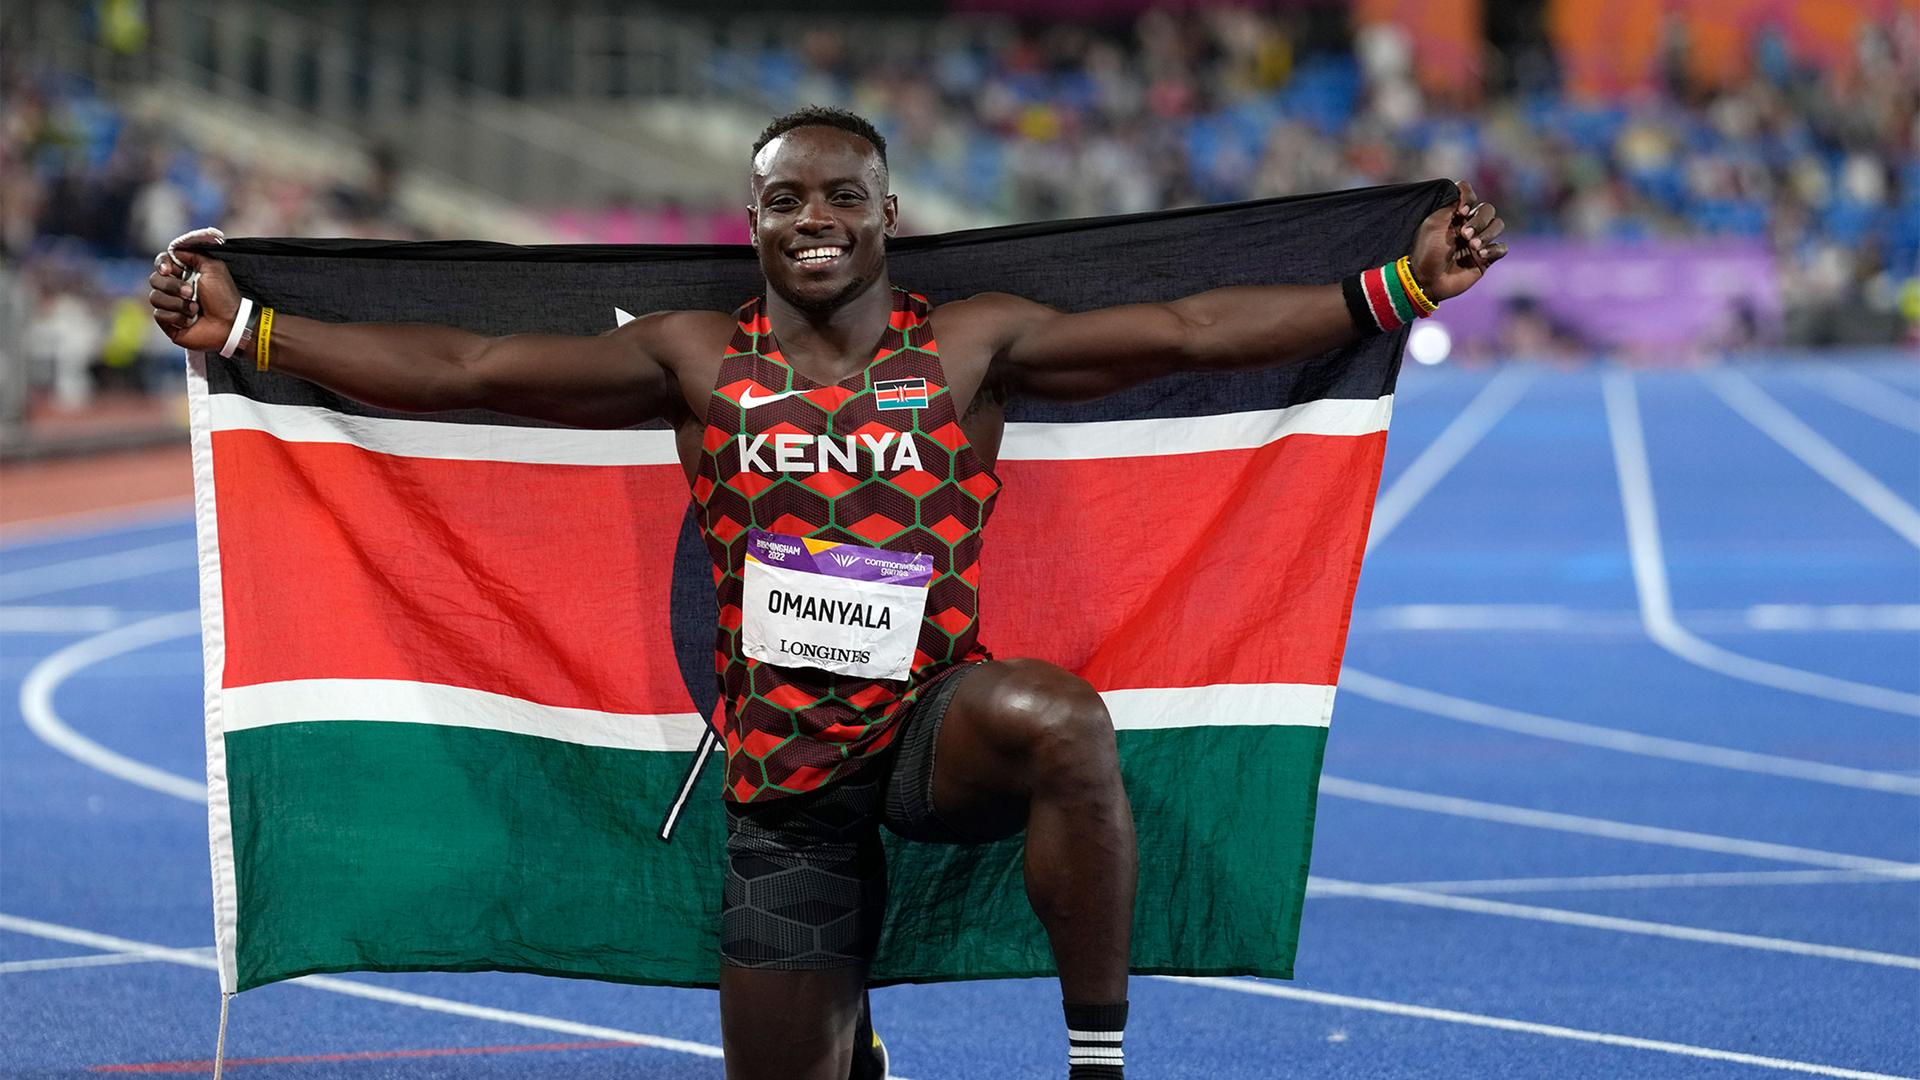 Kenya's Ferdinand Omanyala celebrates after winning gold in the men's 100m final during the athletics in the Alexander Stadium at the Commonwealth Games in Birmingham, England